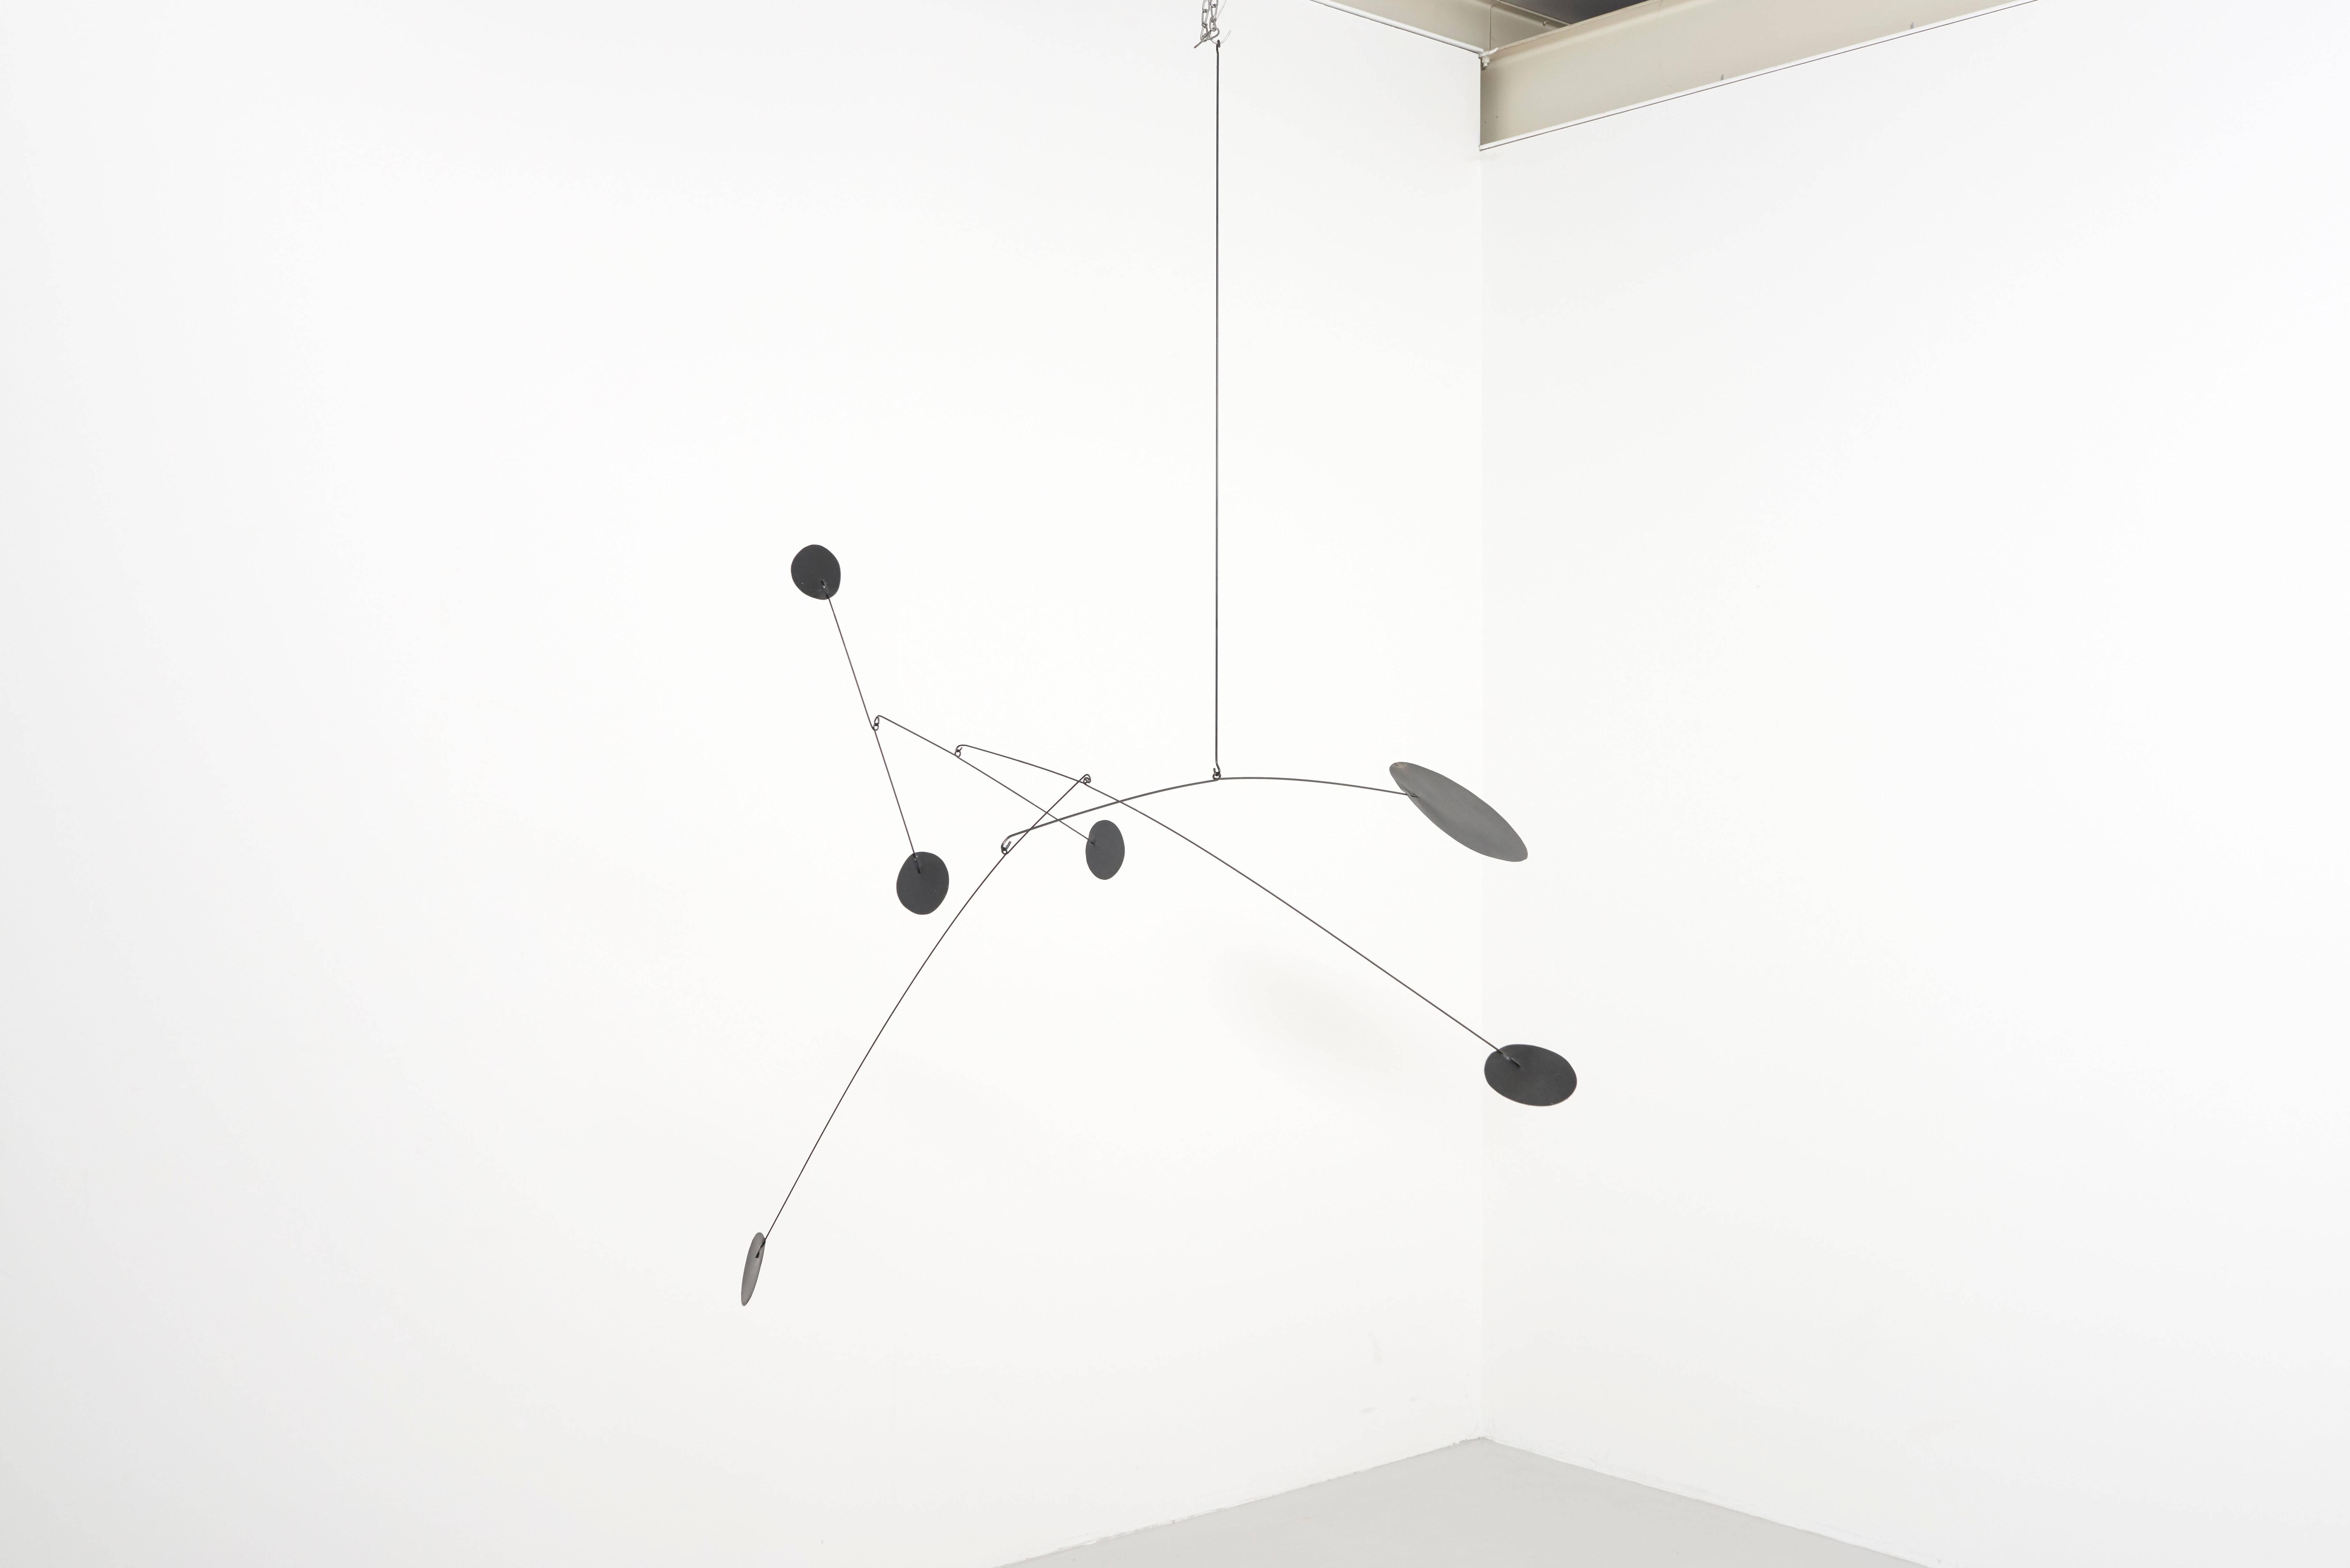 Mobile designed and made by Derick Pobell, Germany. 
Five parts, painted metal in black, arranged with metal bars.
One kinetic sculpture in motion is a feast for the eyes, aesthetically beautiful in a large architectural living space.
Always one